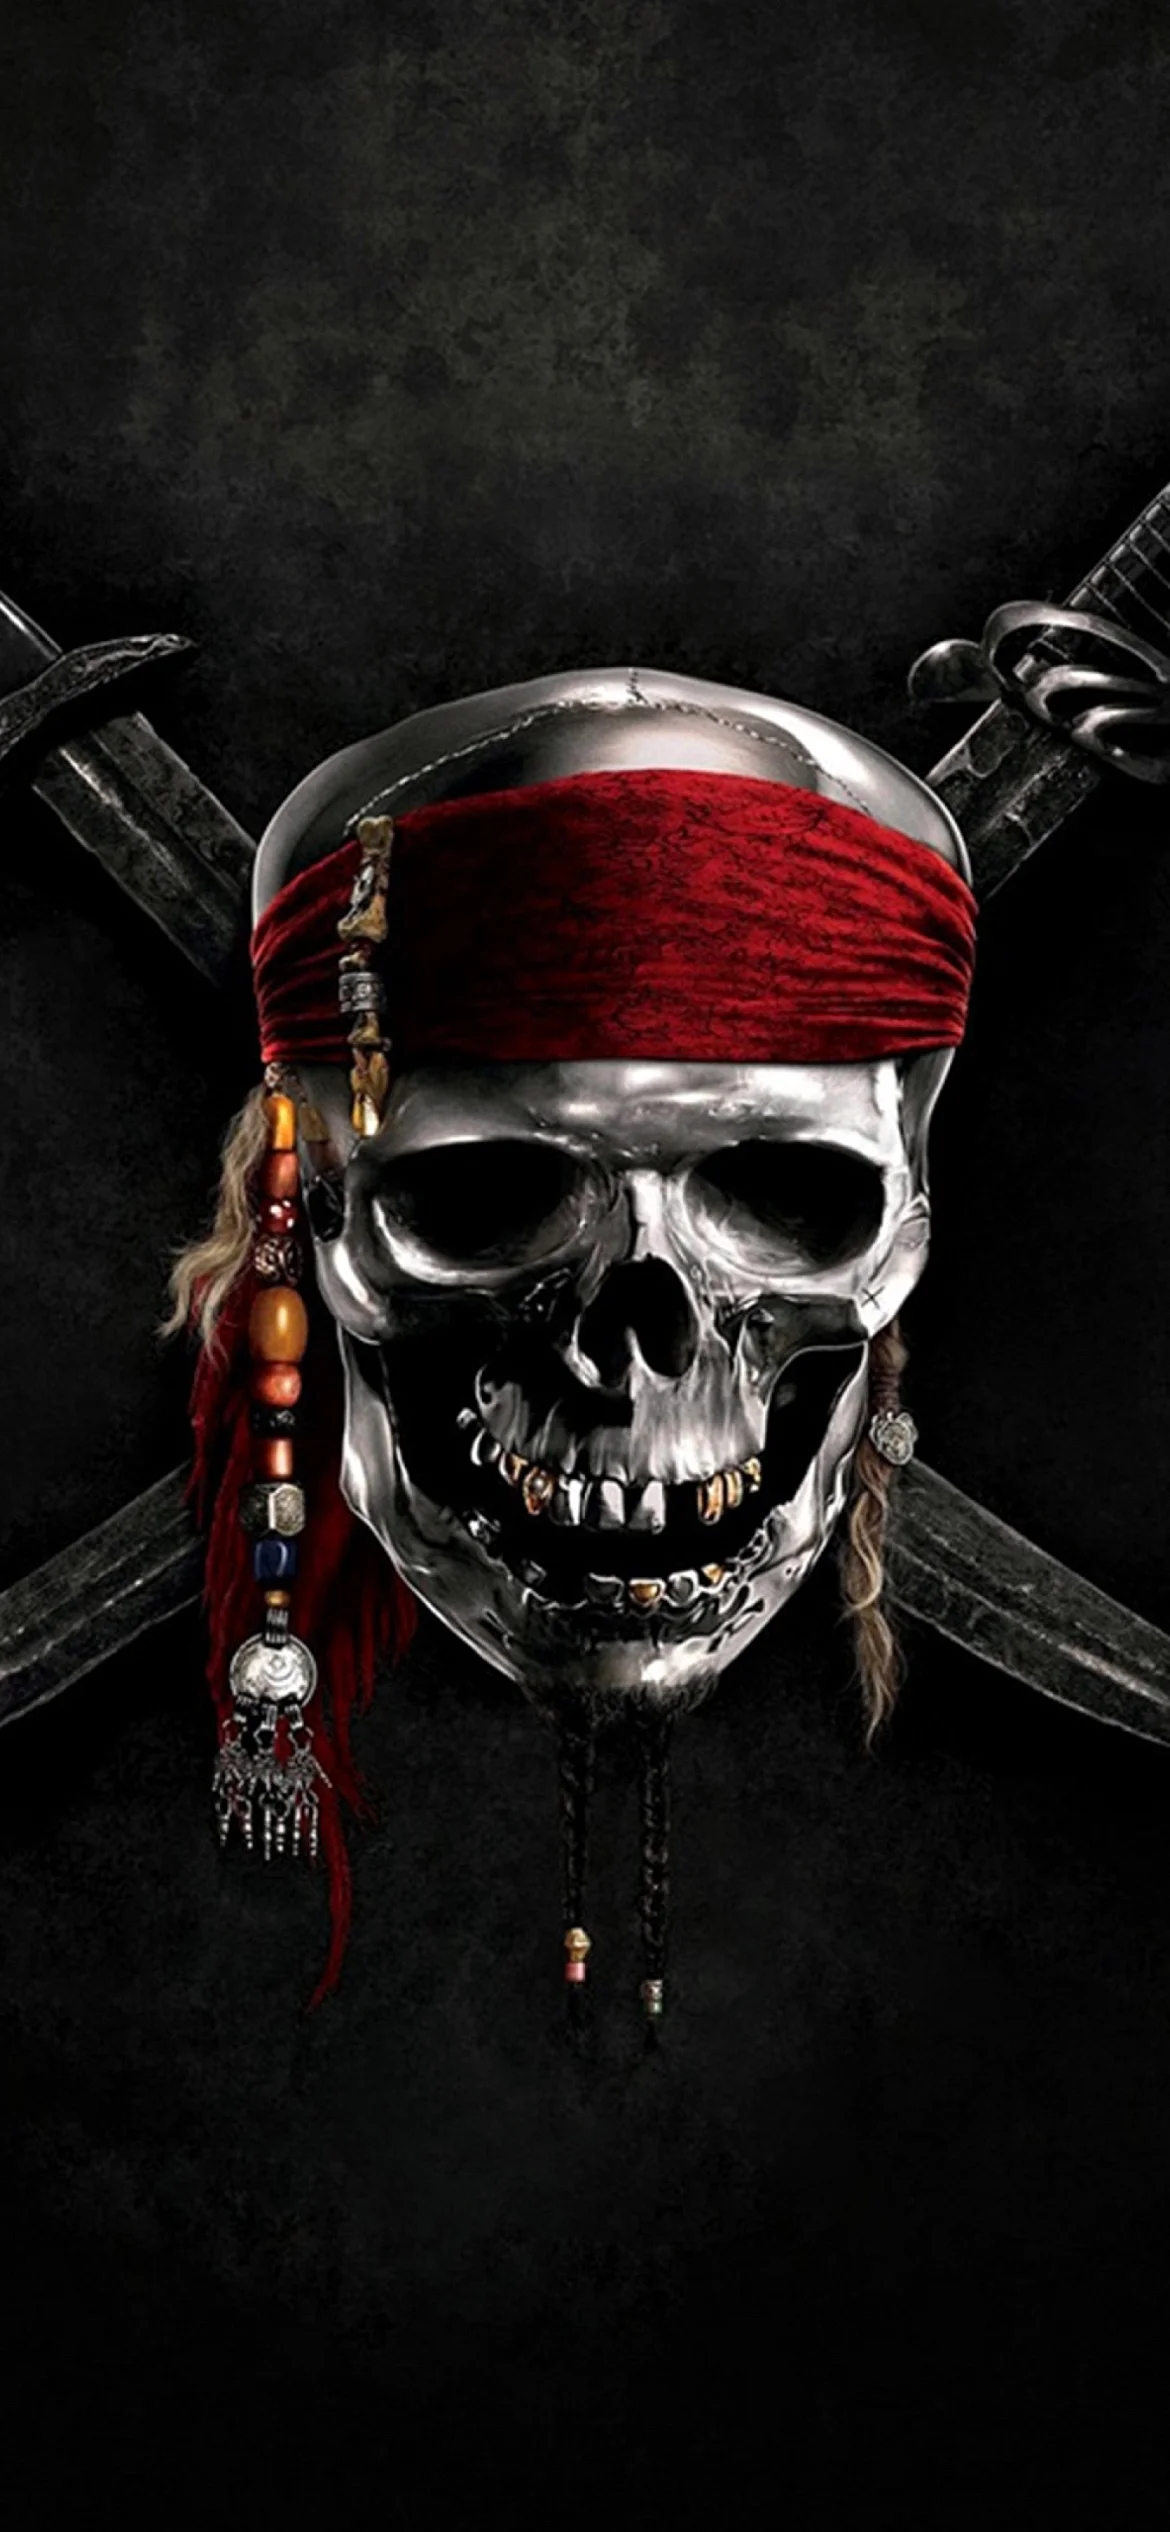 Pirate Skull Wallpaper for iPhone 13 Pro